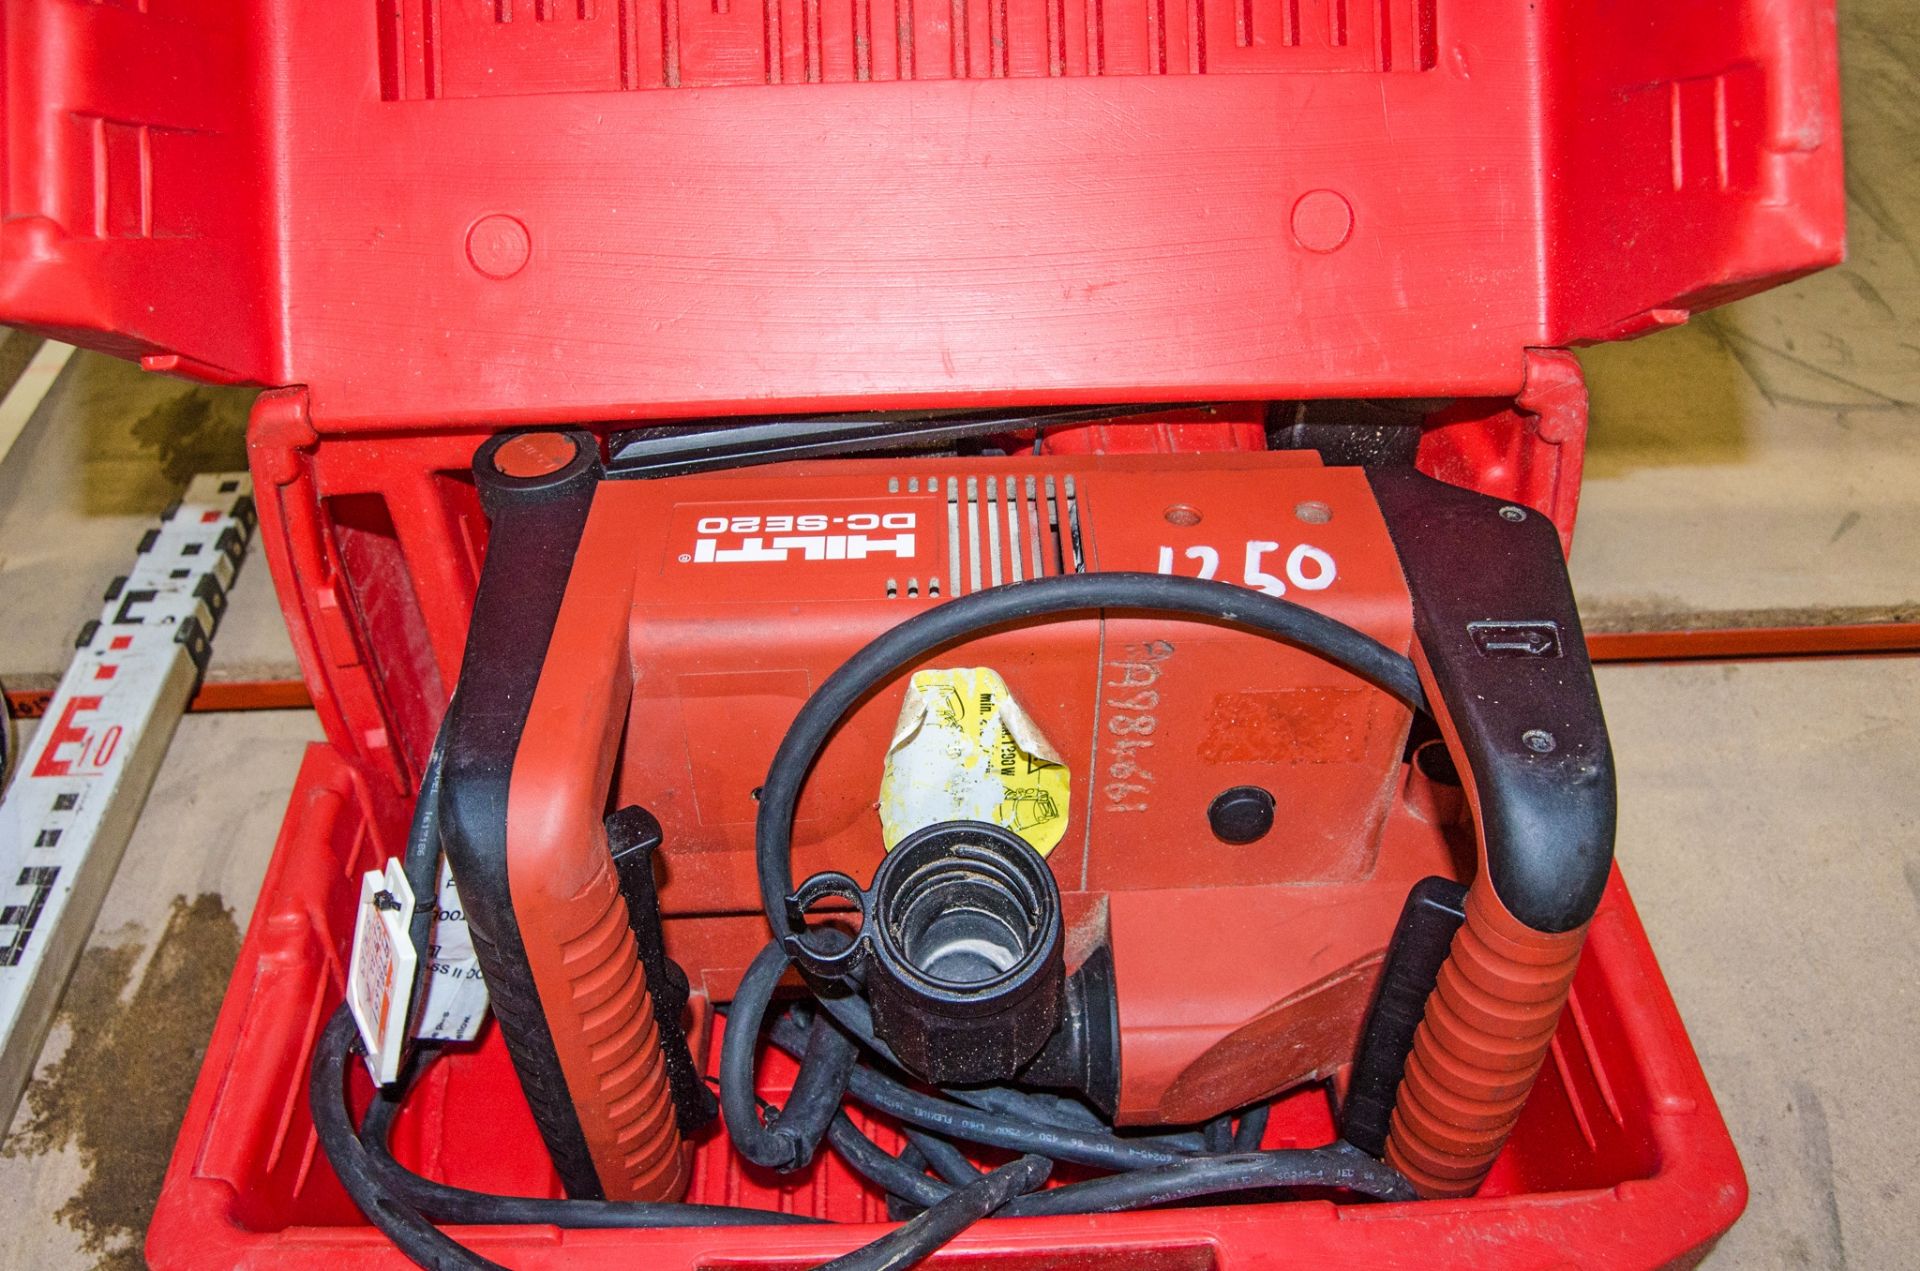 Hilti DC-SE20 110v wall chaser c/w carry case A984661